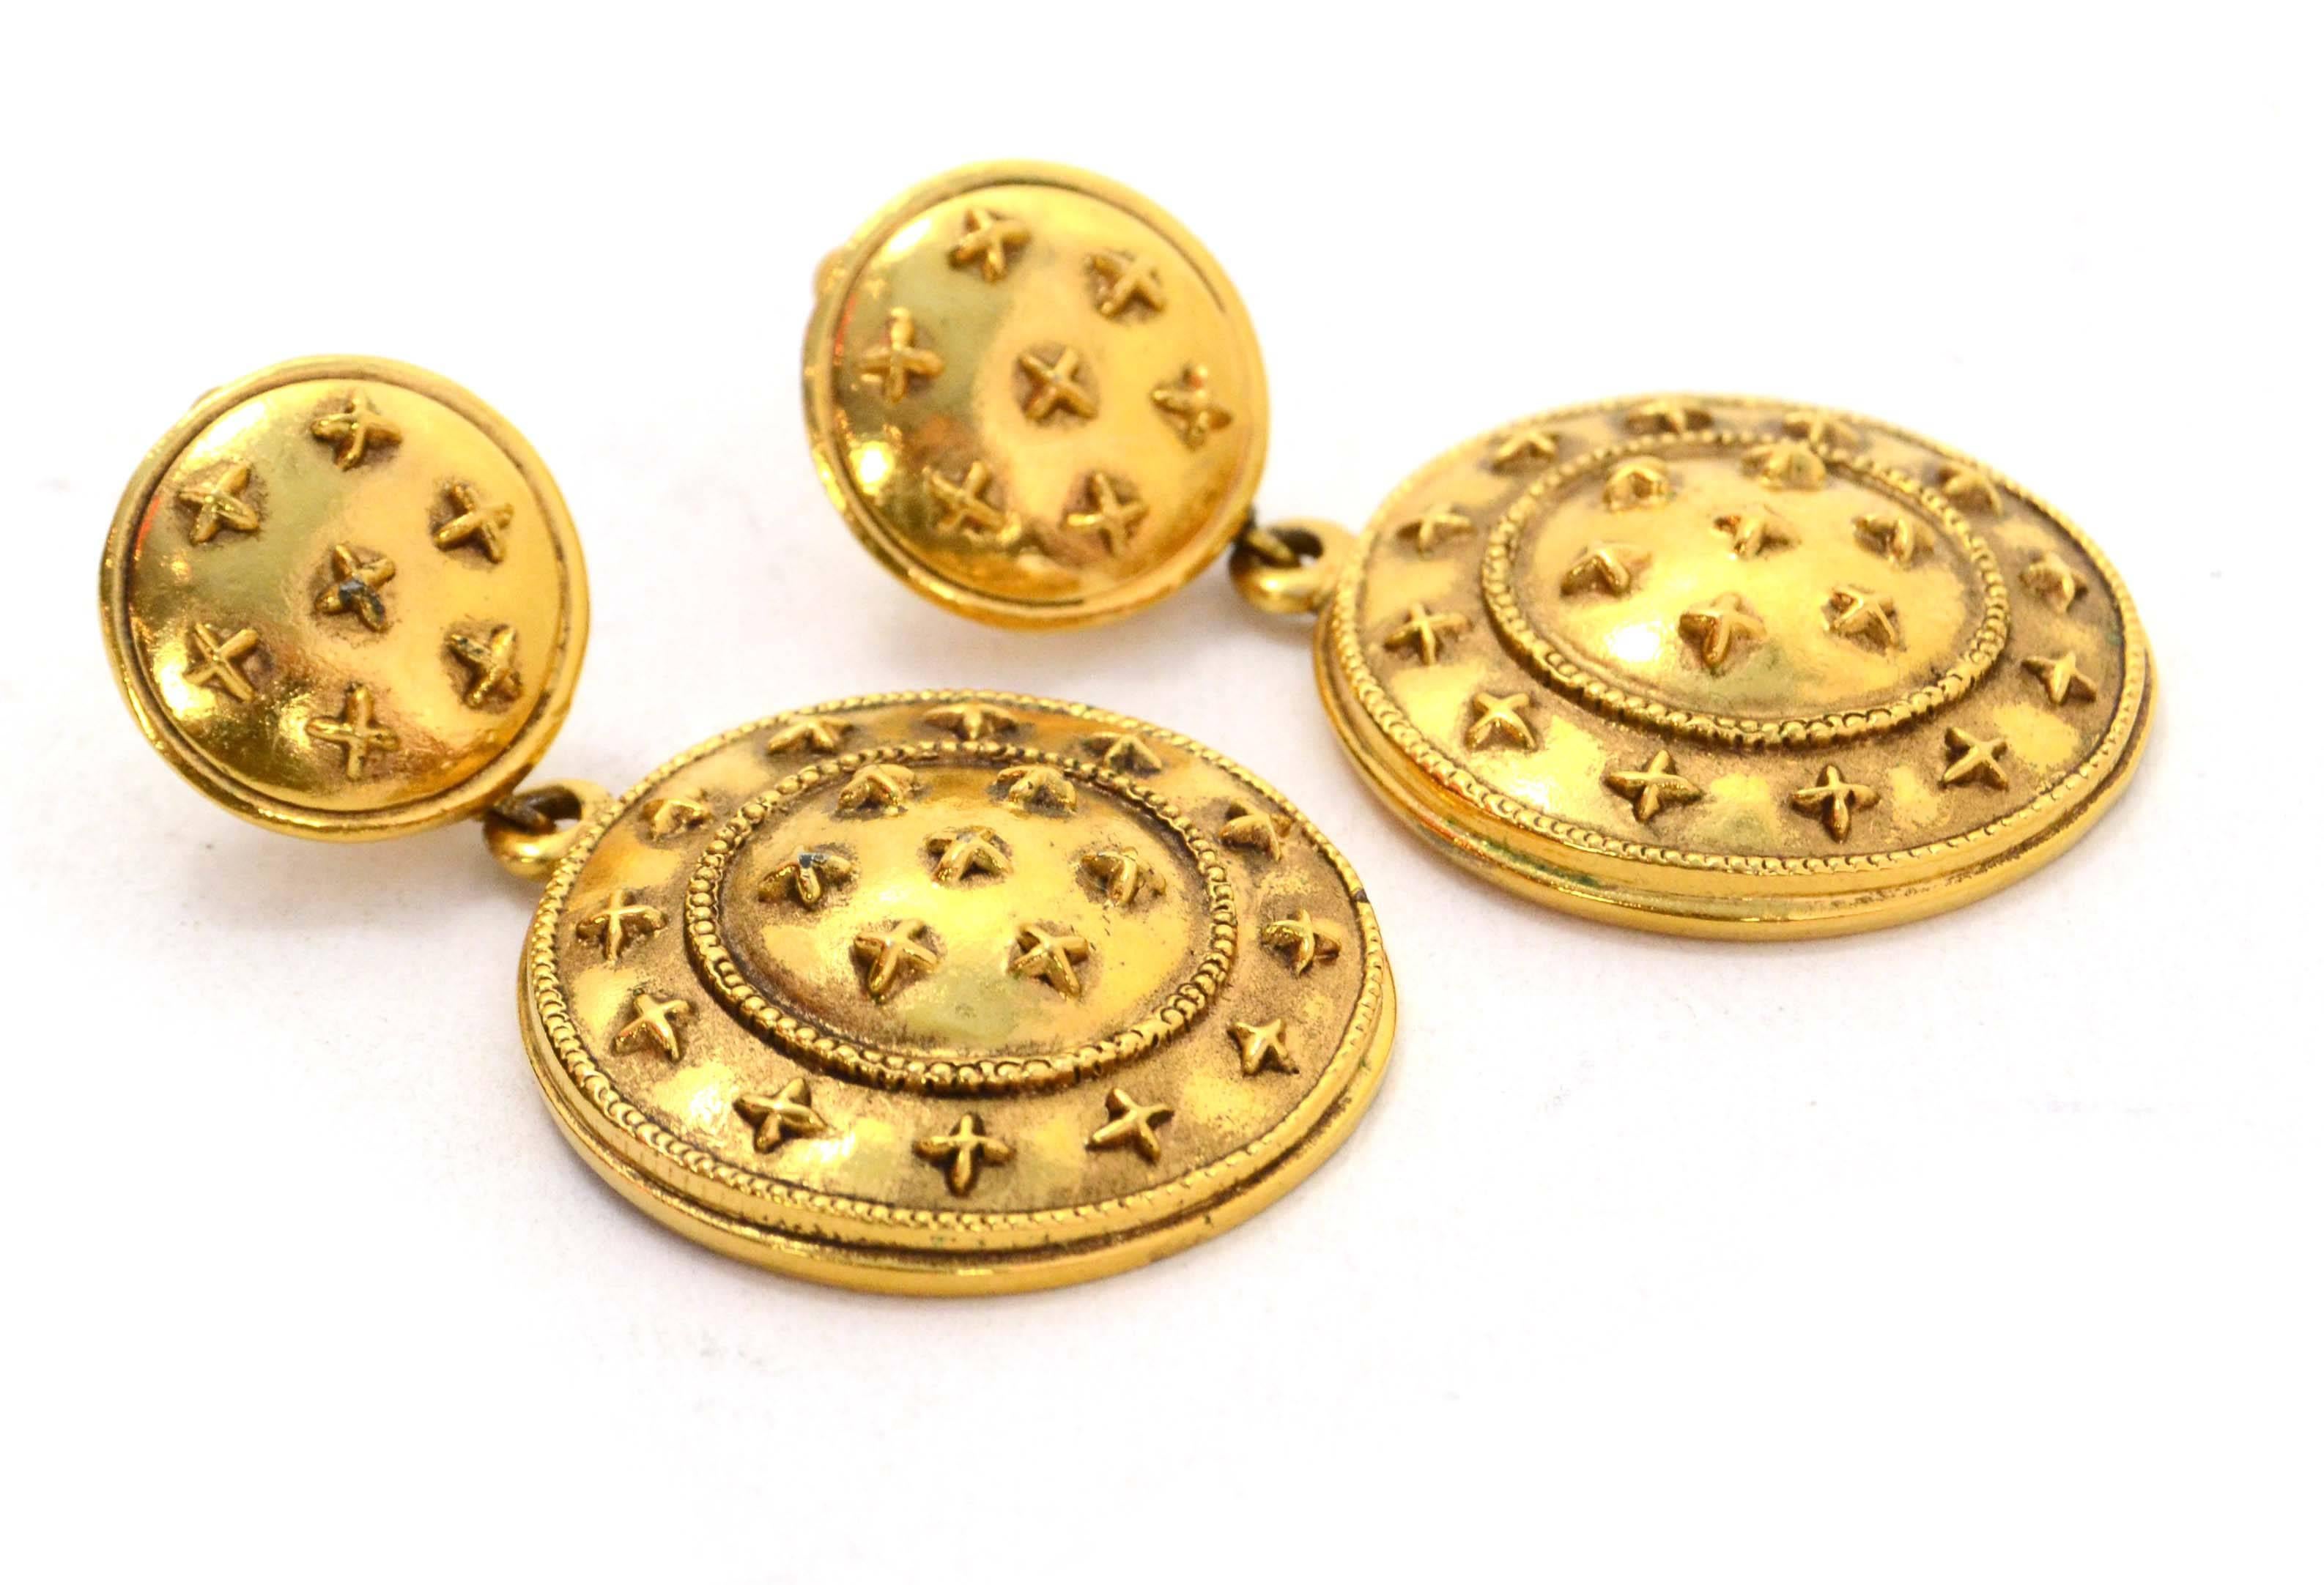 Chanel Vintage ‘70s Gold Dangling Clip On Earrings
Features small stars throughout
Made In: France
Year of Production: 1970’s
Color: Goldtone
Materials: Metal
Closure: Clip on
Stamp: Chanel CC Made in France
Overall Condition: Excellent